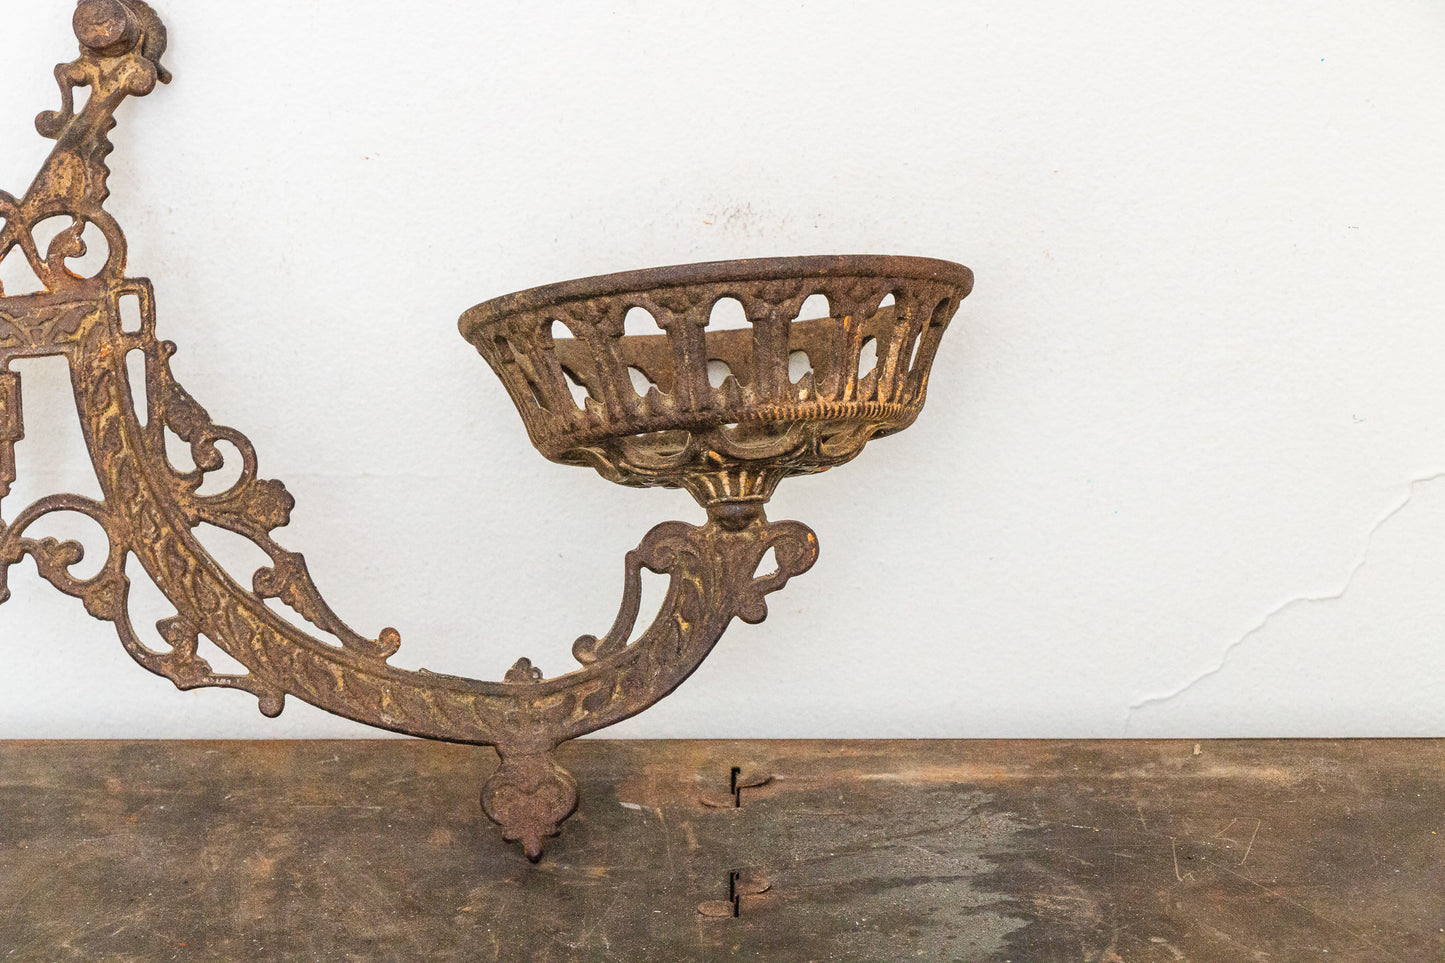 Ornate Victorian Cast Iron Candle Sconce with Mirrored Wall Plate